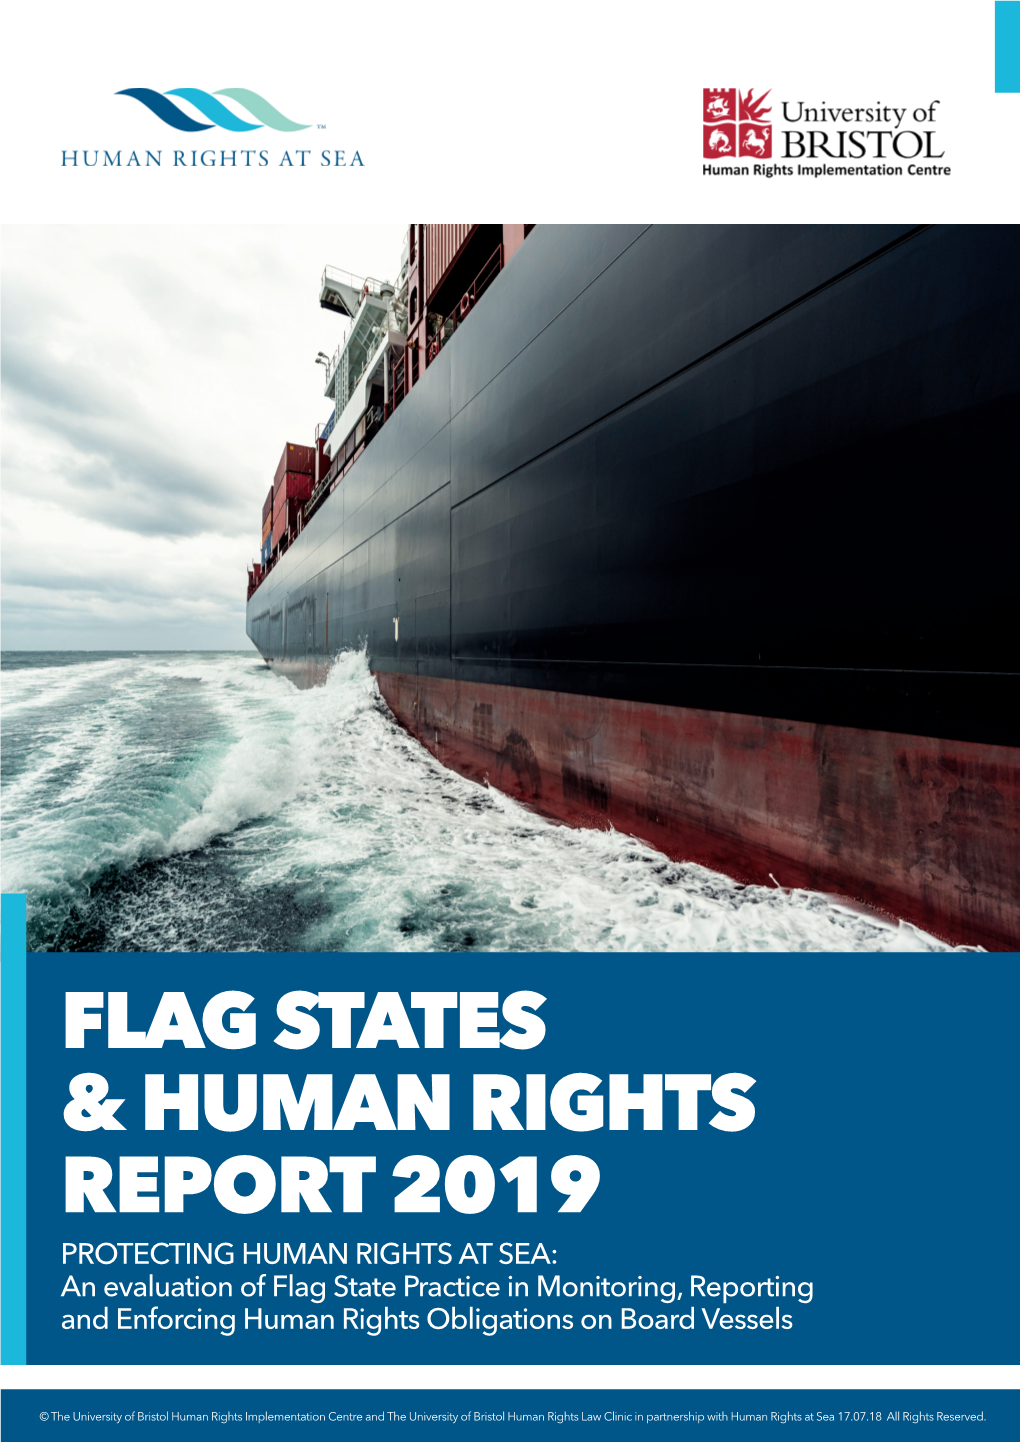 Flag States & Human Rights Report 2019